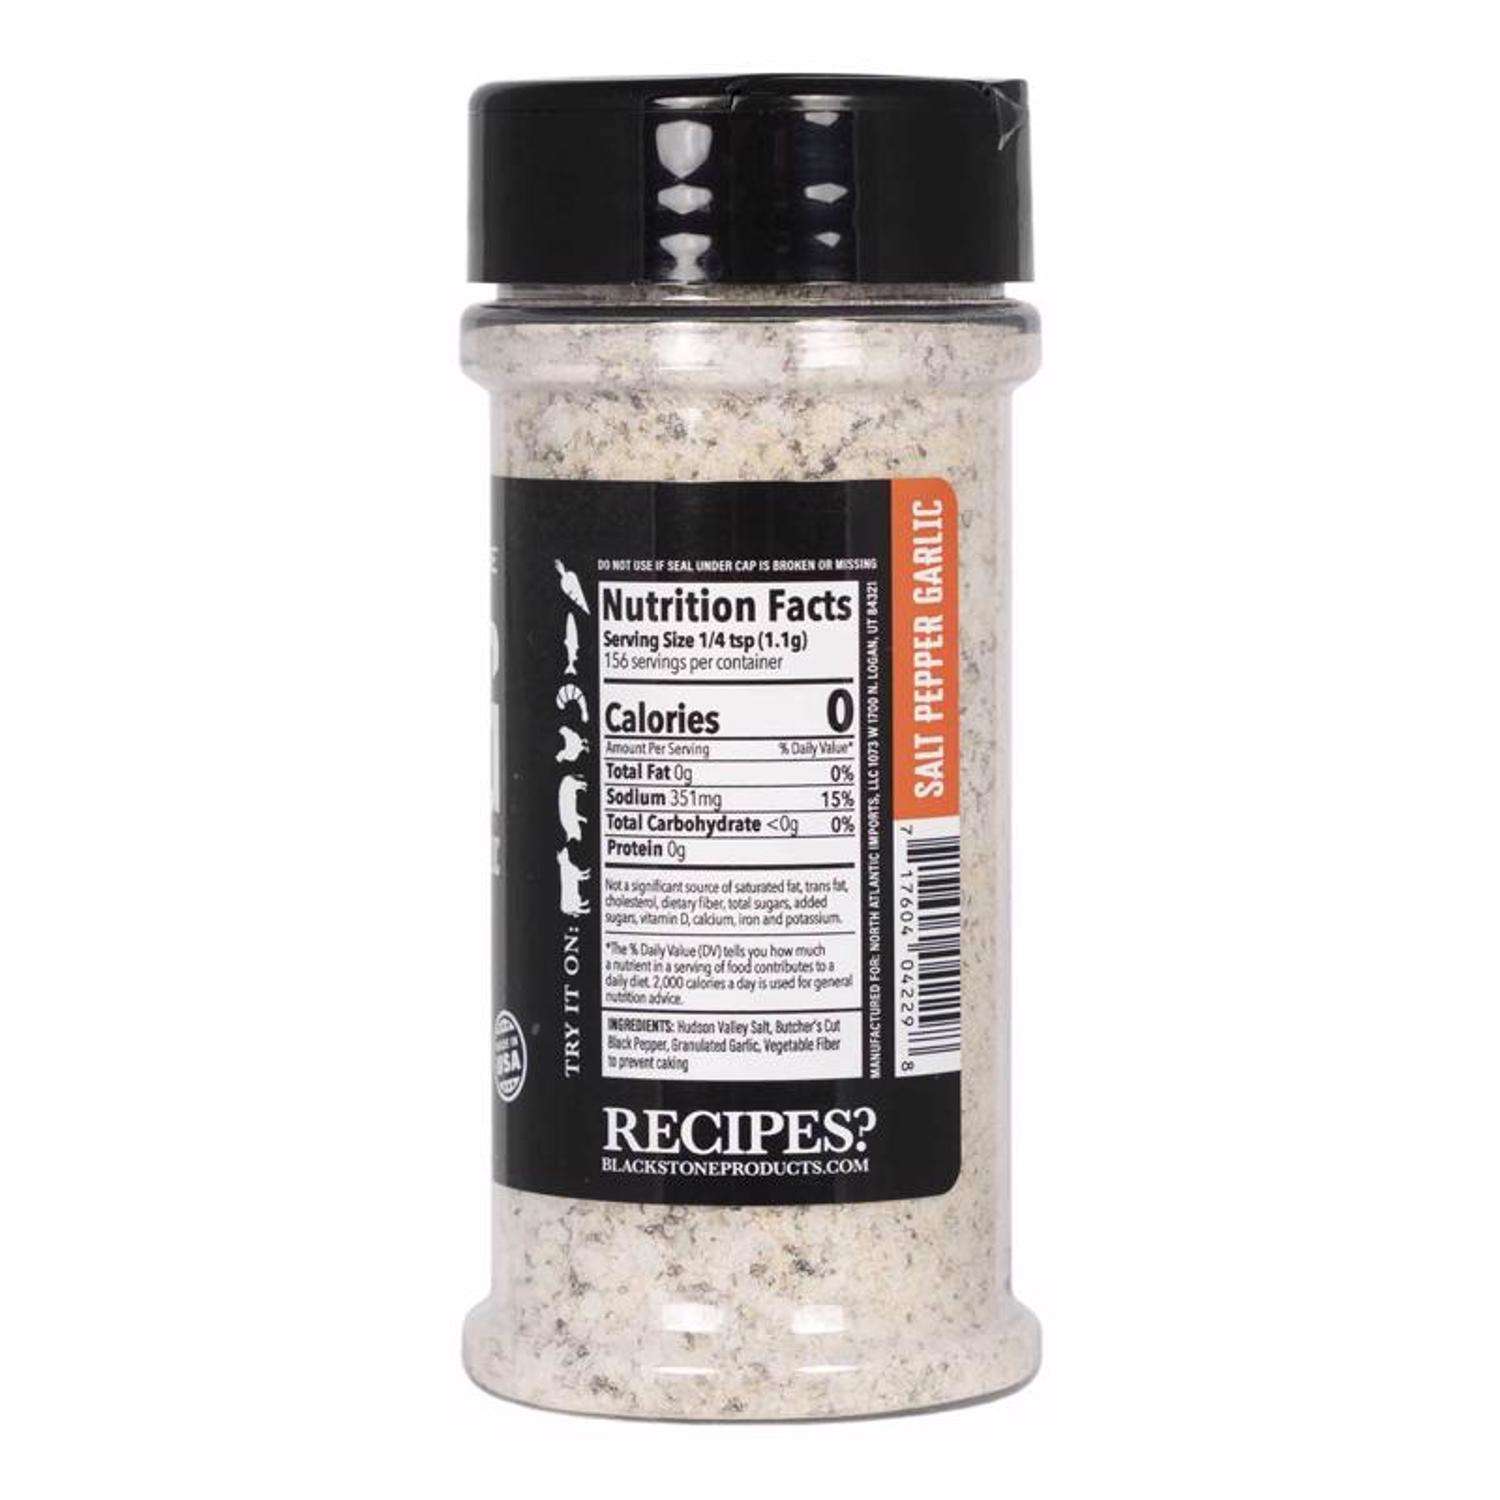 Pepper-Like Seasoning 8.5 oz CLEARANCE - Expired or about to